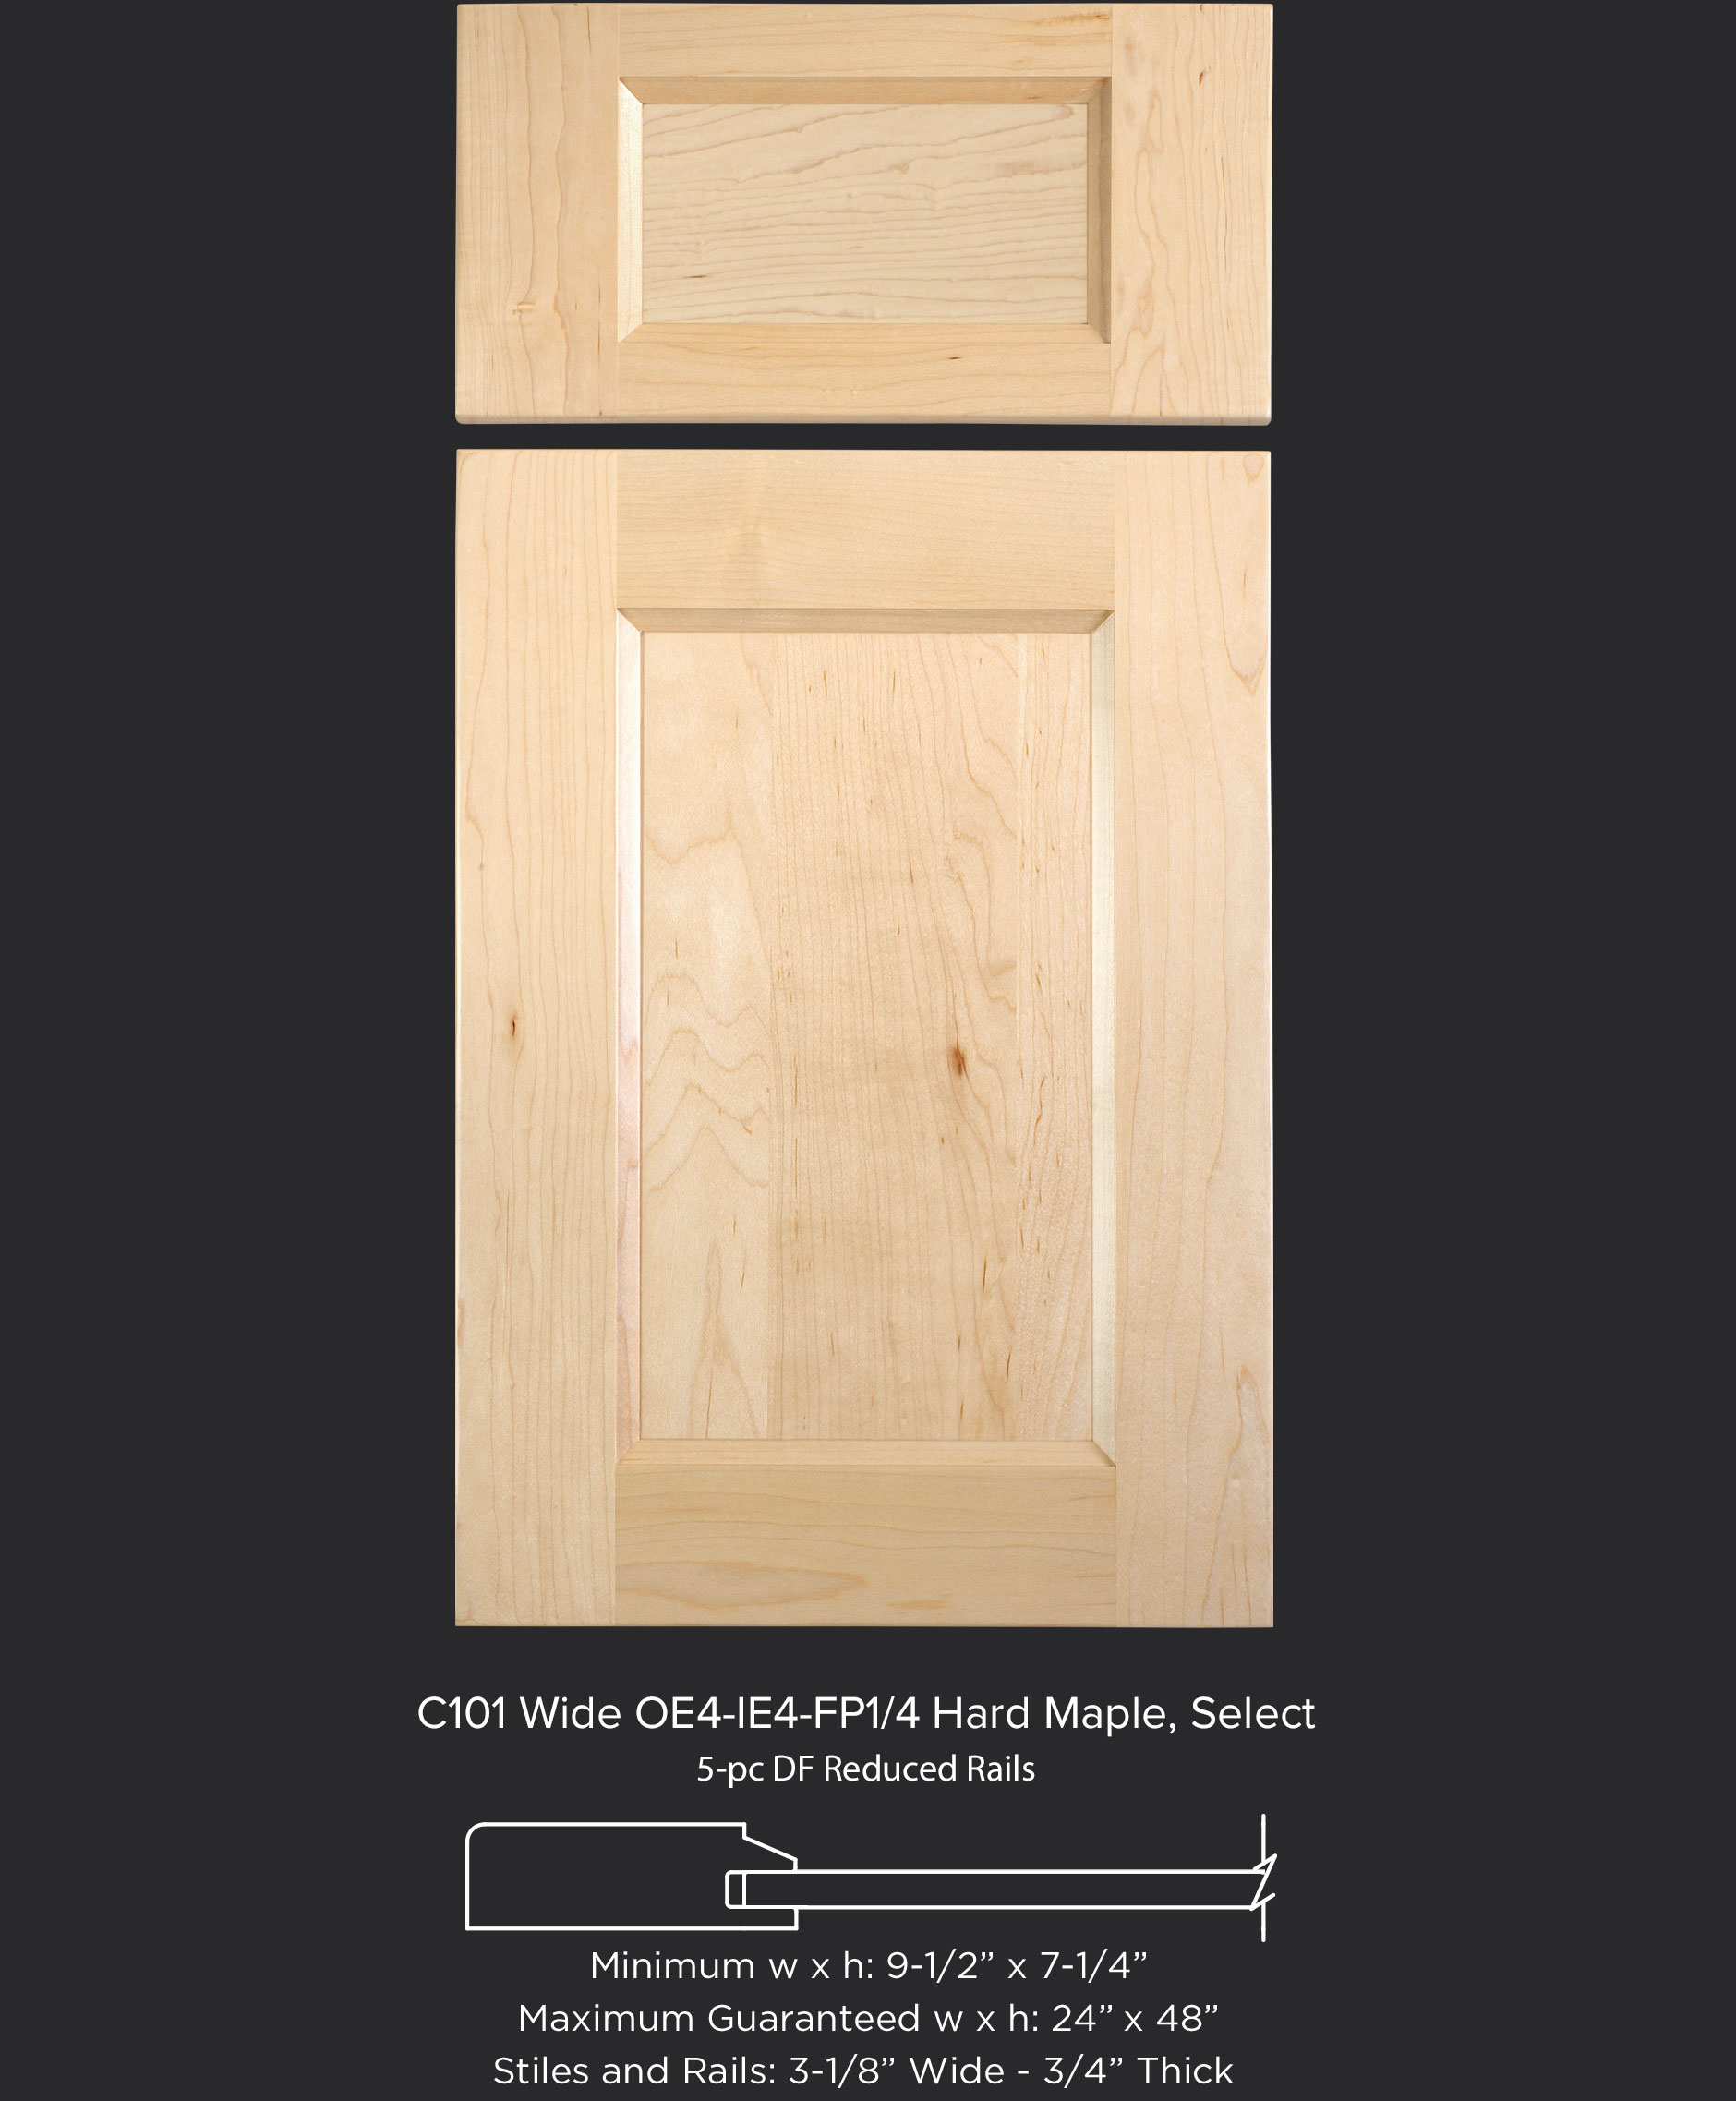 TaylorCraft's transitional cabinet door in hard maple with OE4, IE4 and FP1/4